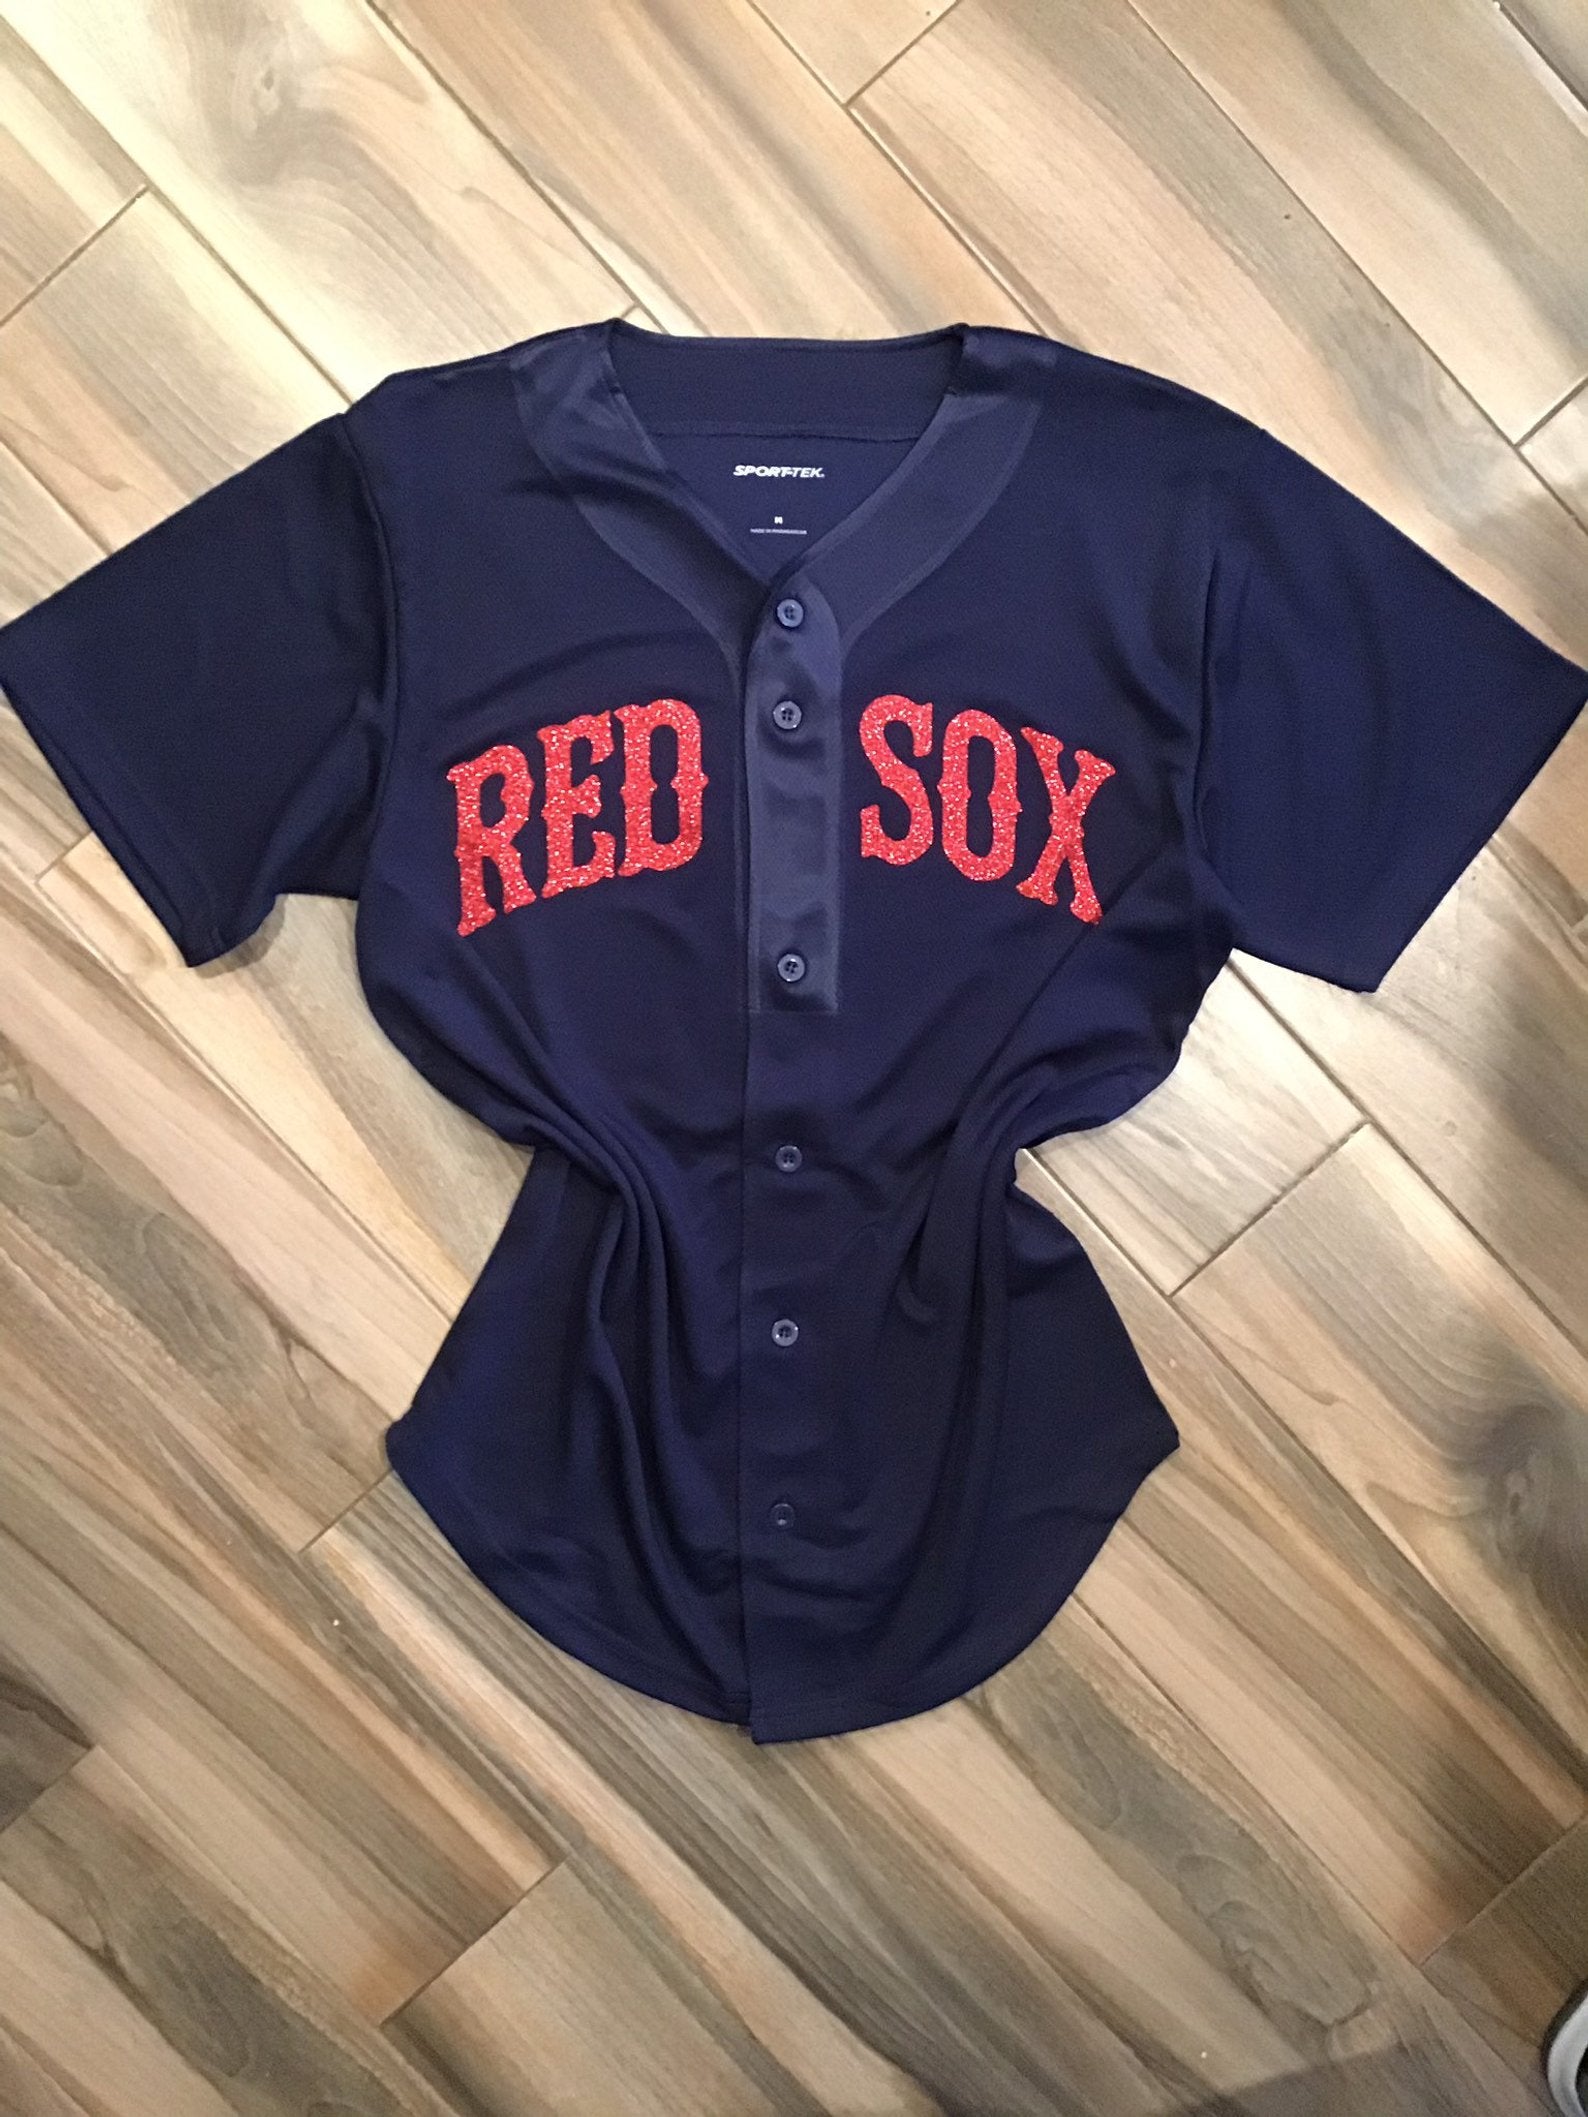 red sox gear for women